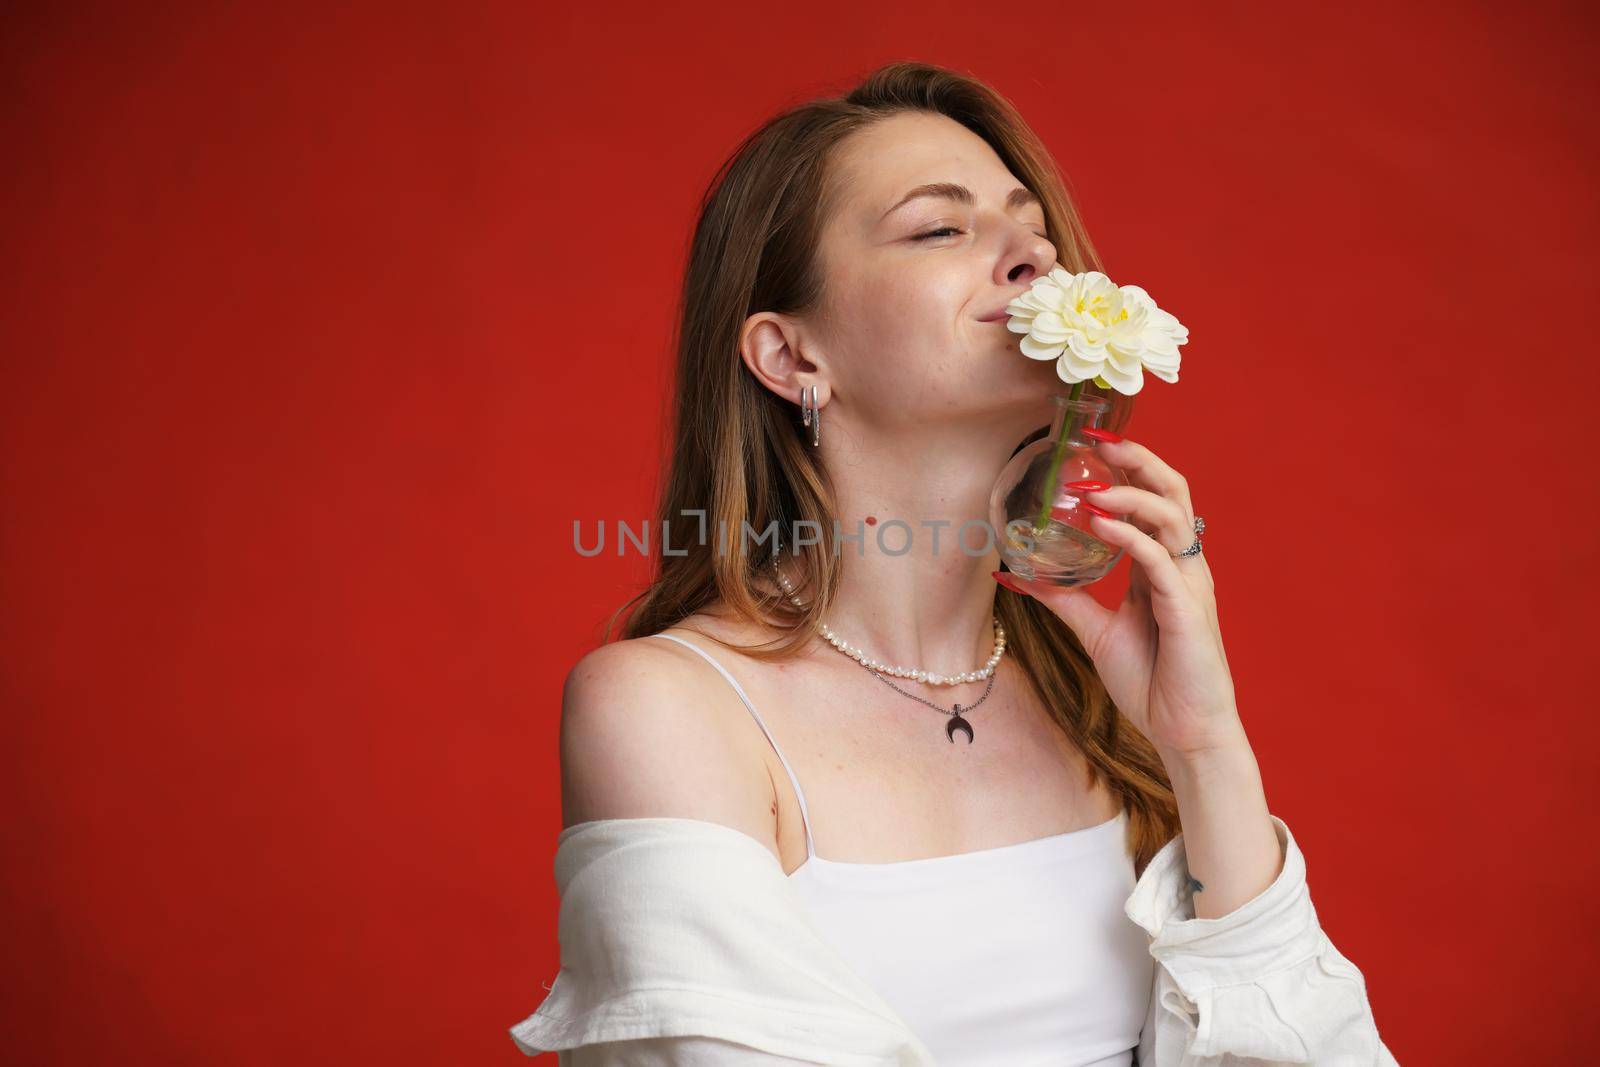 Young model in white shirt posing with flower with smile on red background